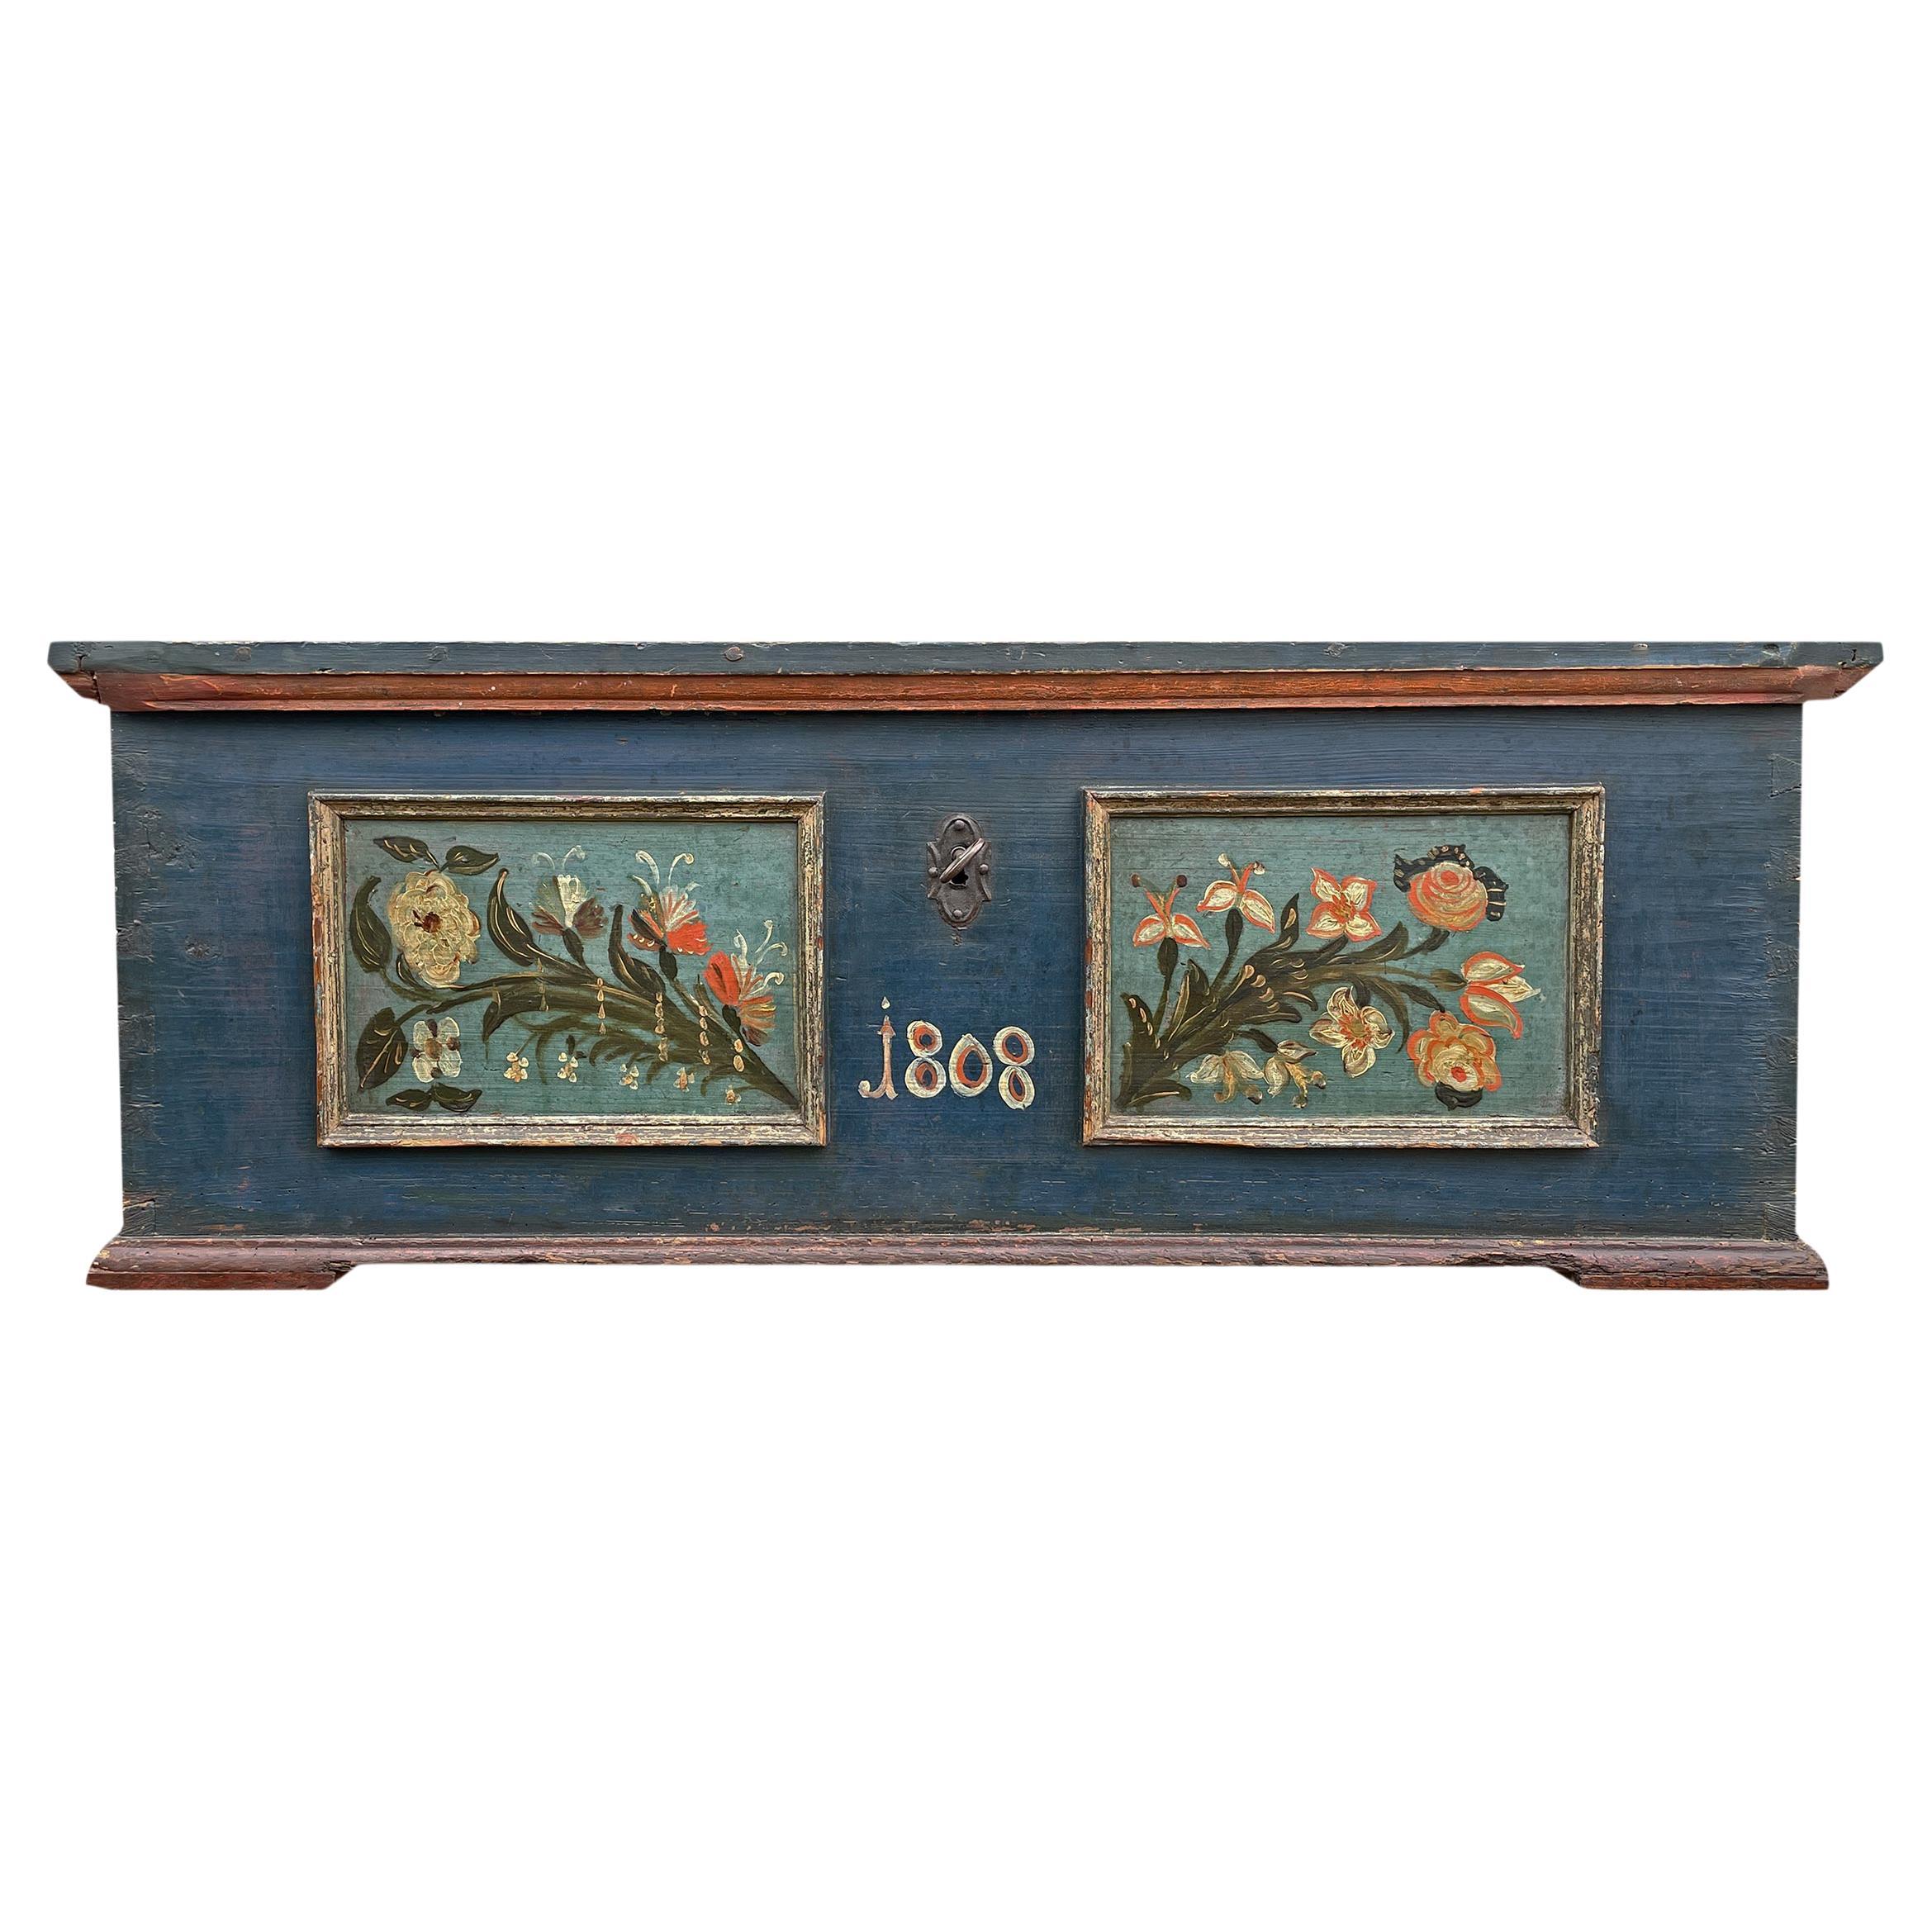 1808 Blu Floral Painted Blanket Chest